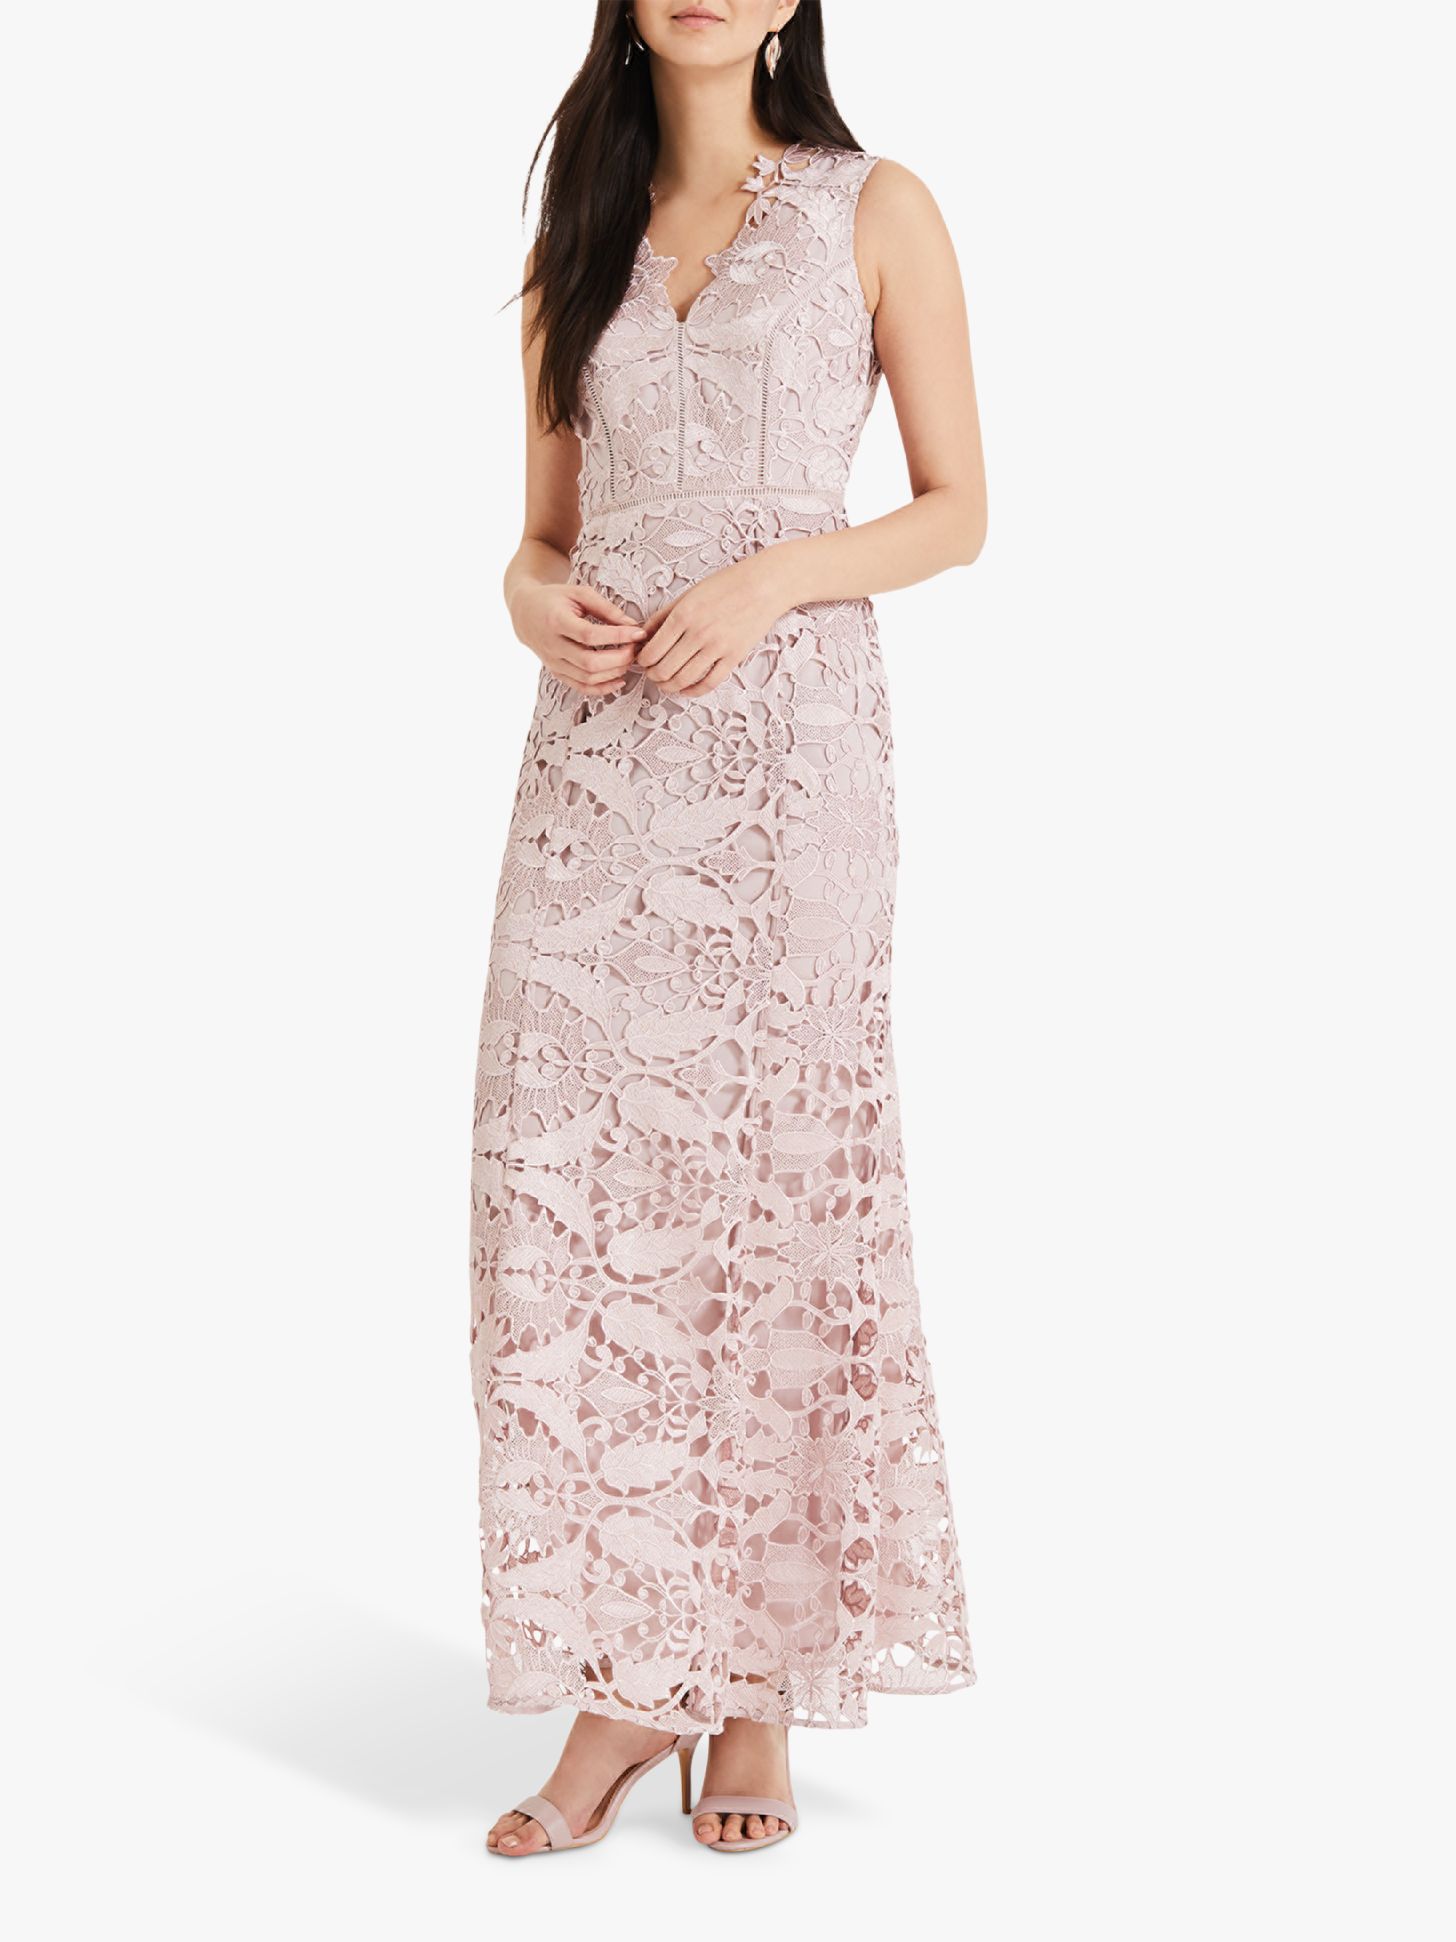 Phase Eight Collection 8 Zoey Lace Maxi Dress, Petal